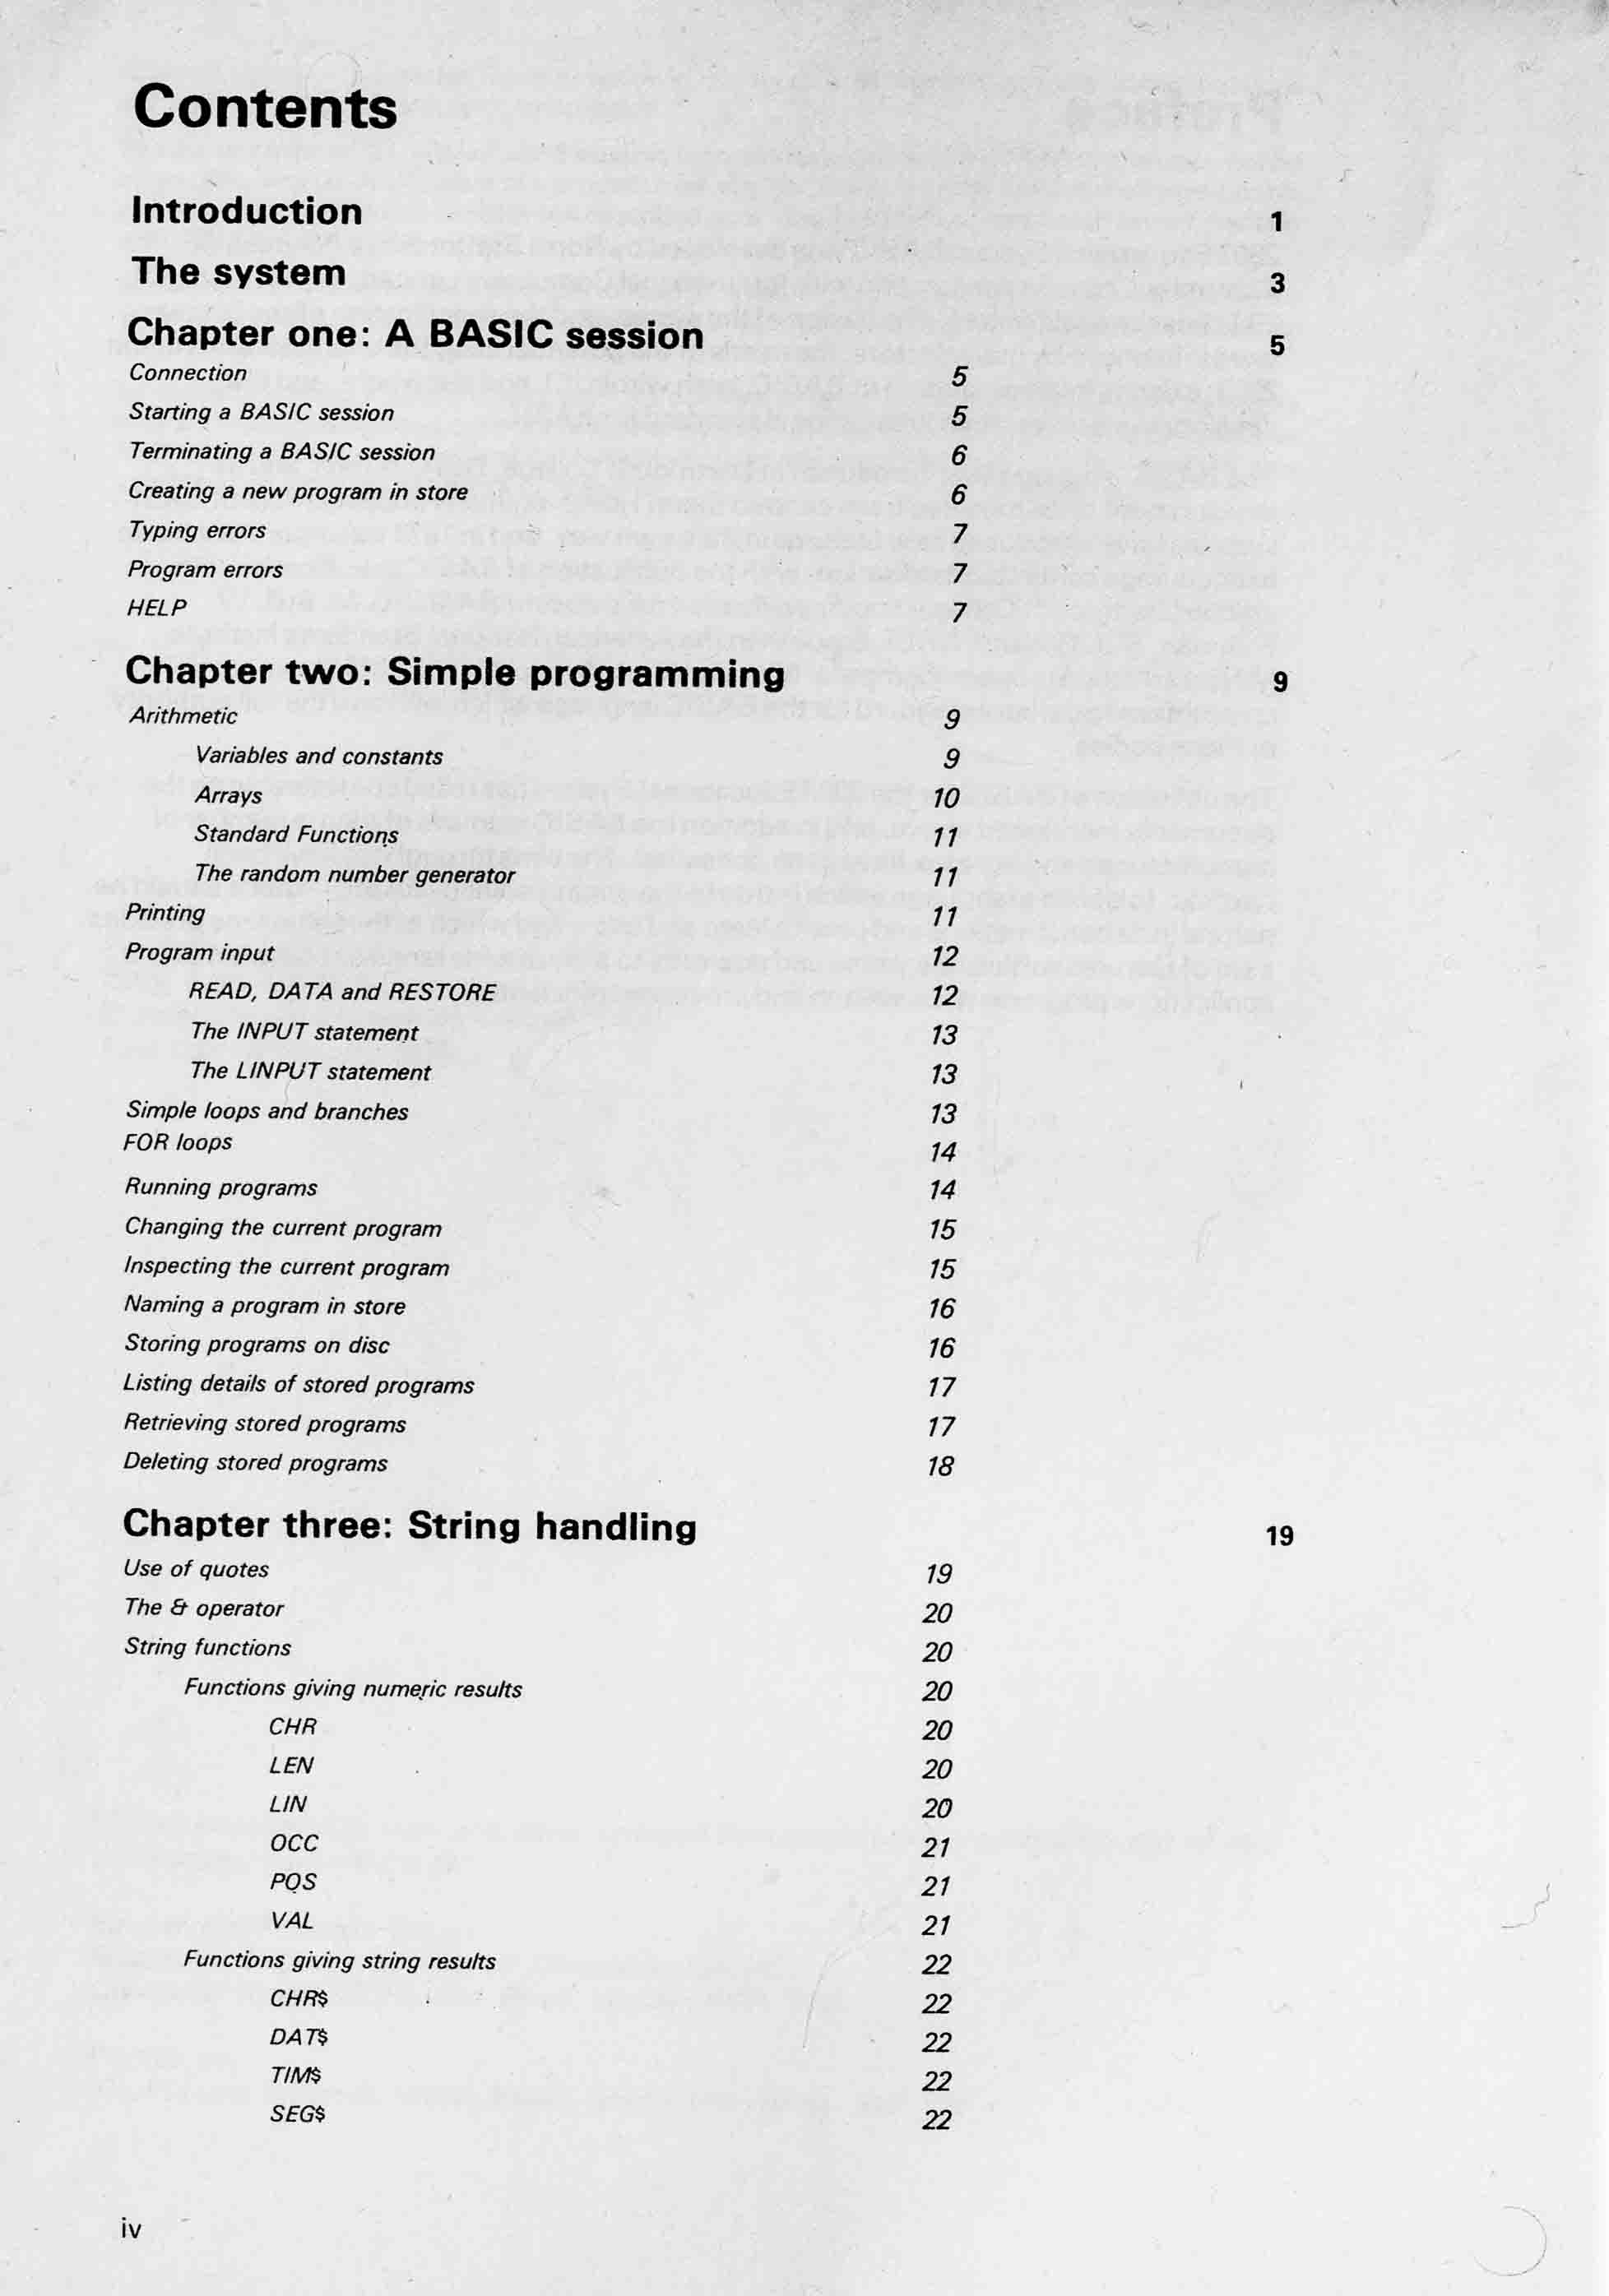 Scan of first contents page